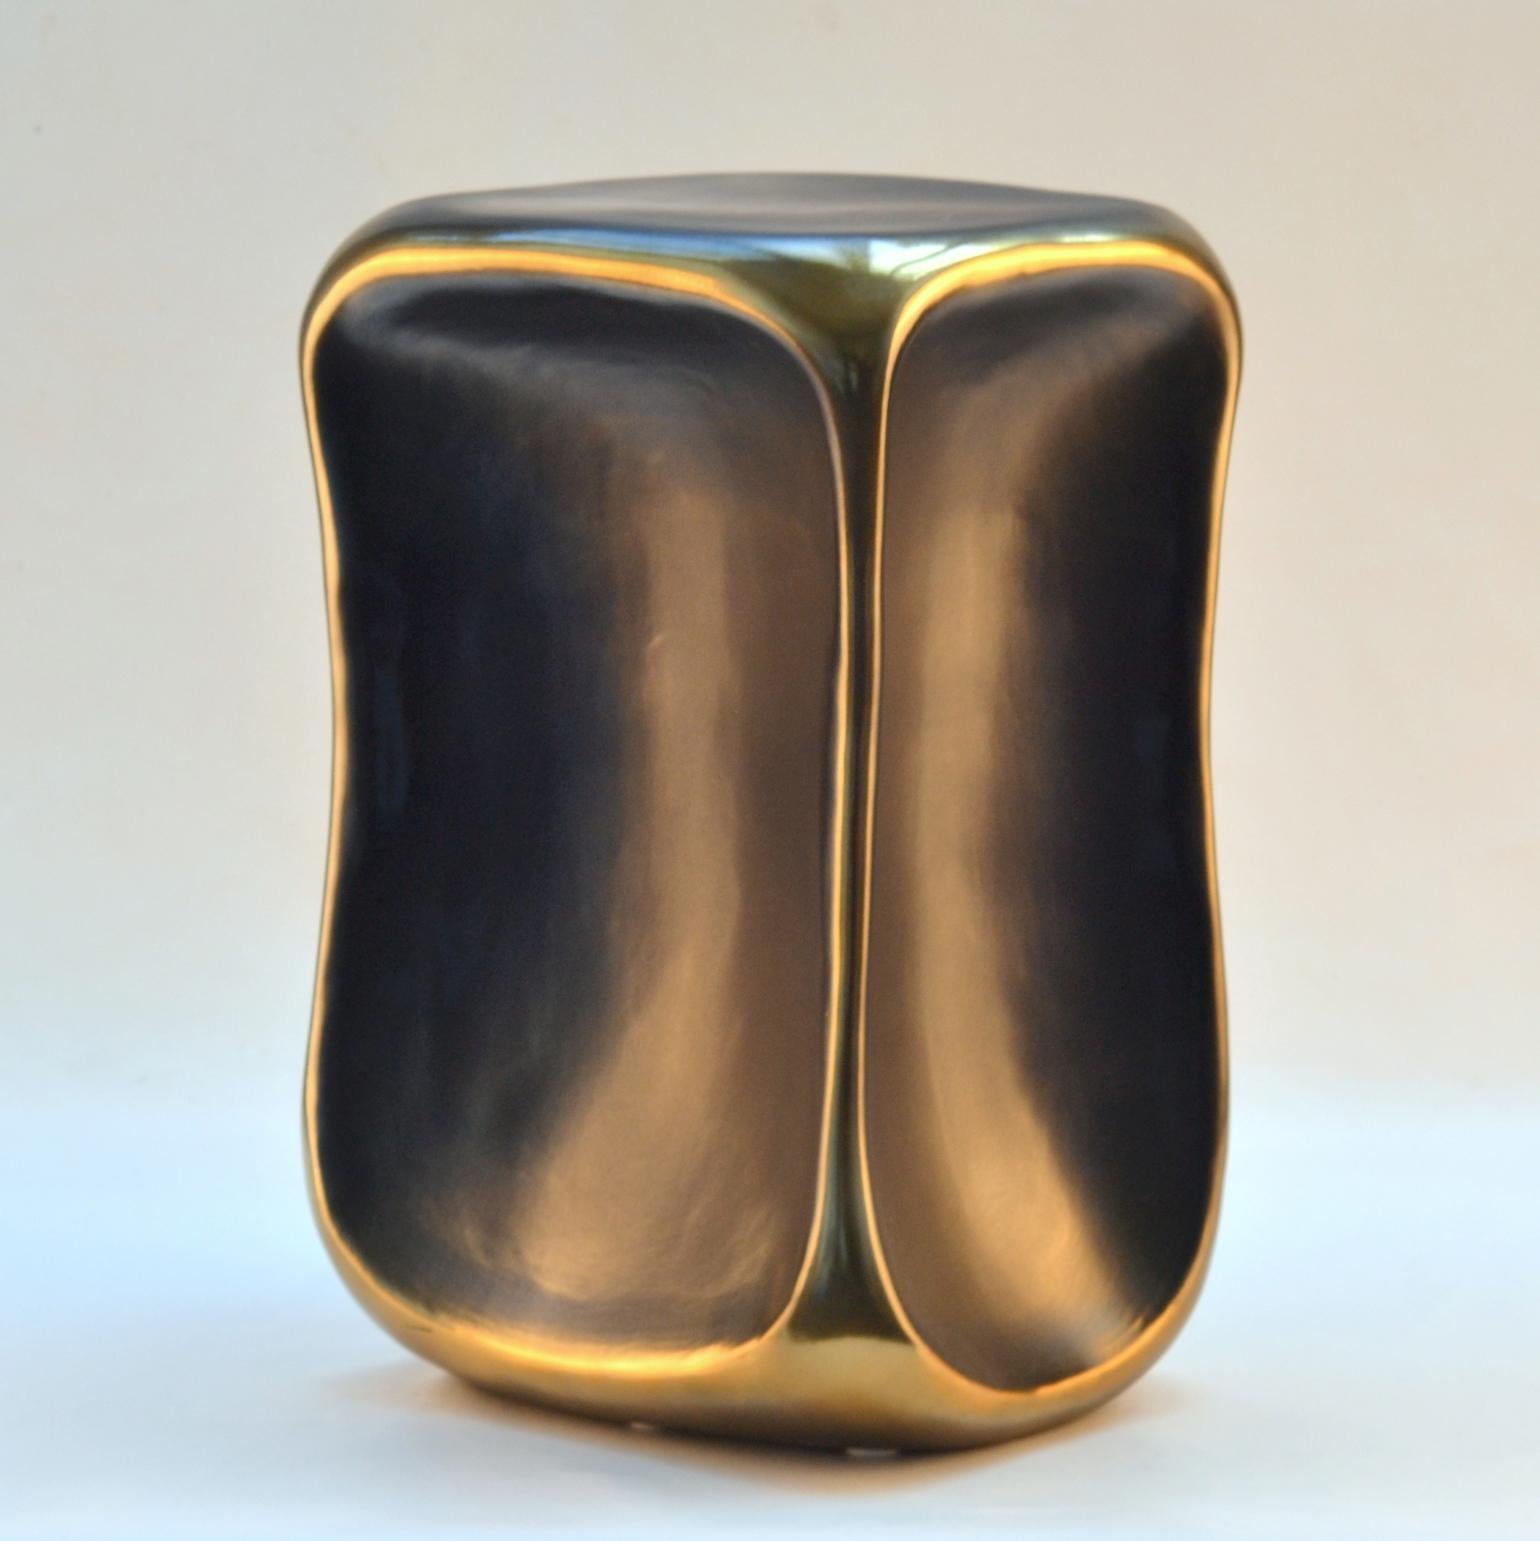 Sculptural Ceramic Black and Gold Square Side Table In Excellent Condition For Sale In London, GB